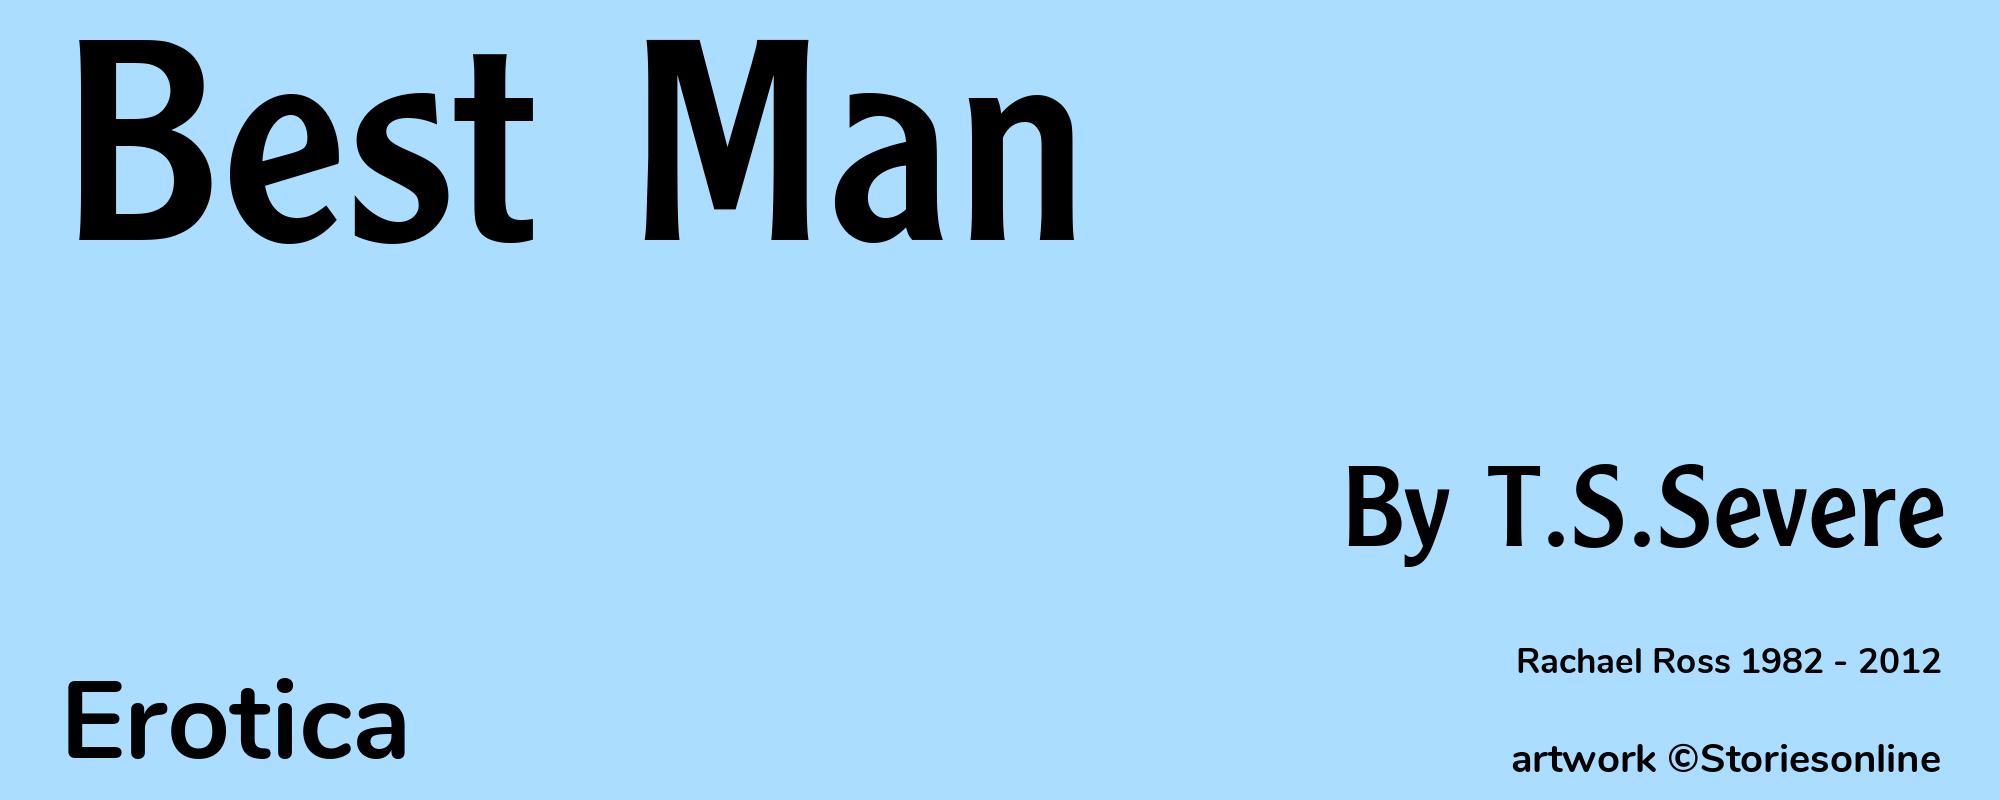 Best Man - Cover